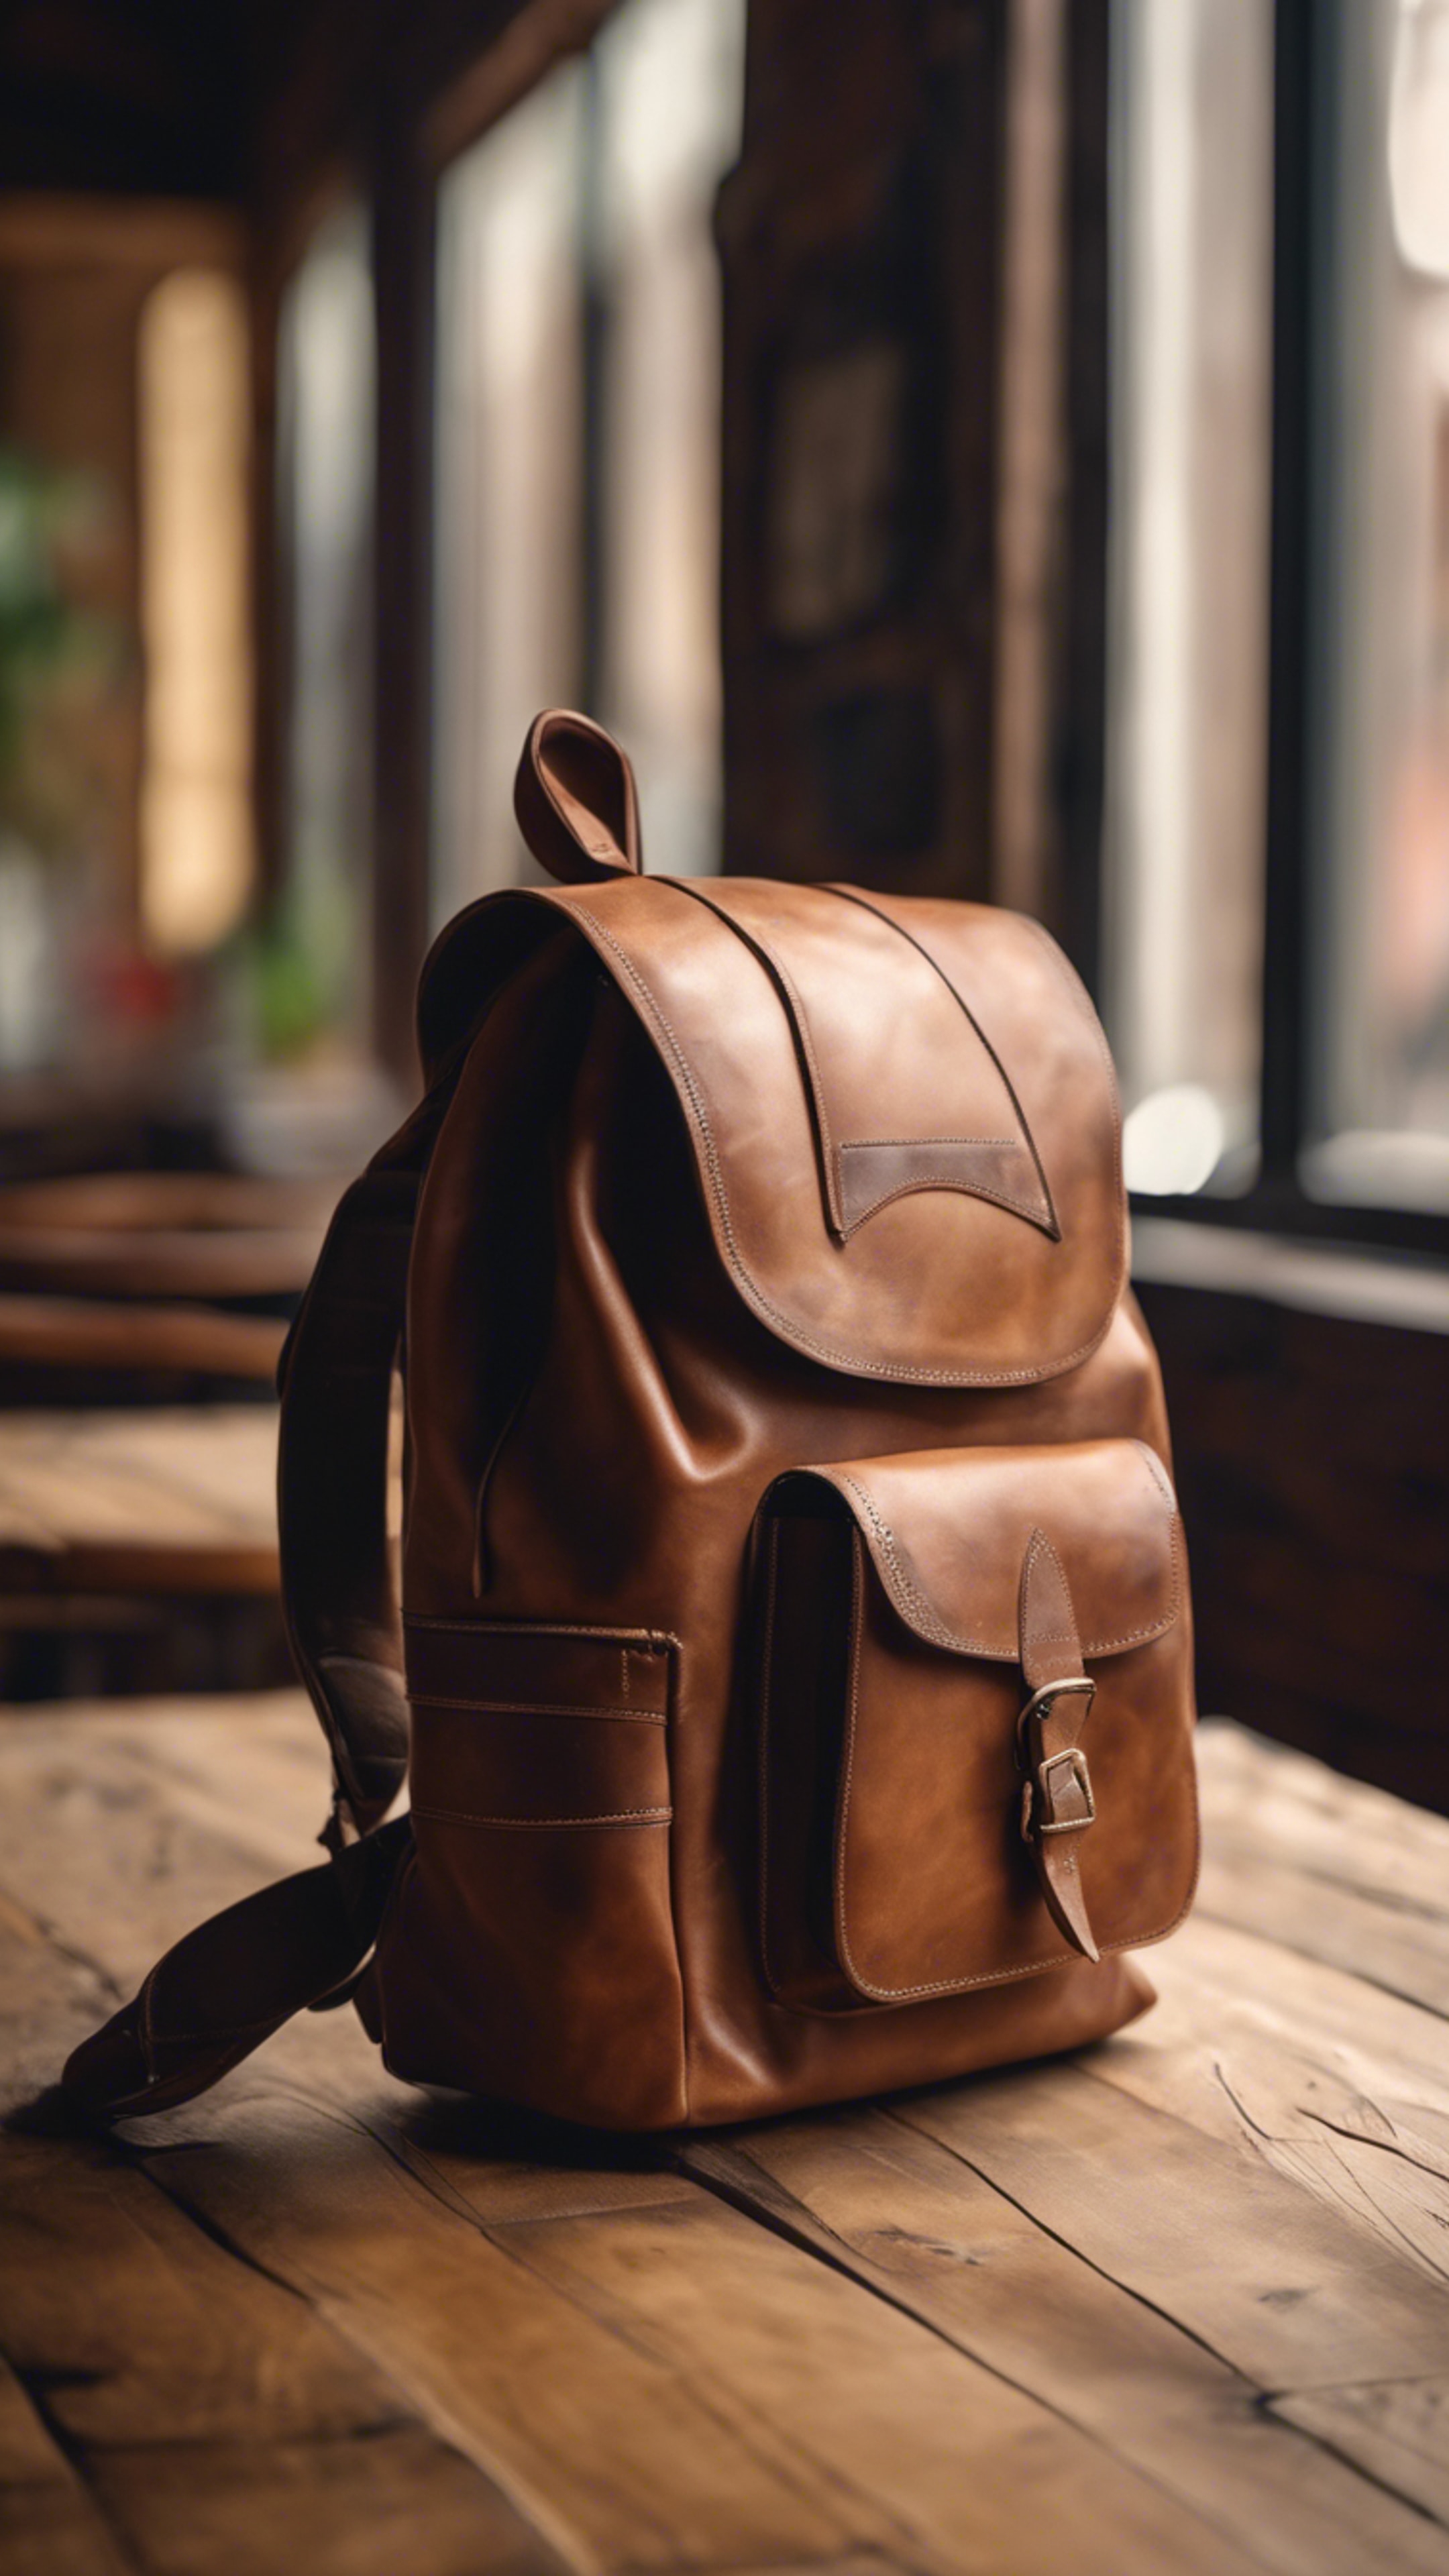 A vintage brown leather backpack sitting on a wooden table in a cozy café. Behang[7ce12483b5e34217b072]